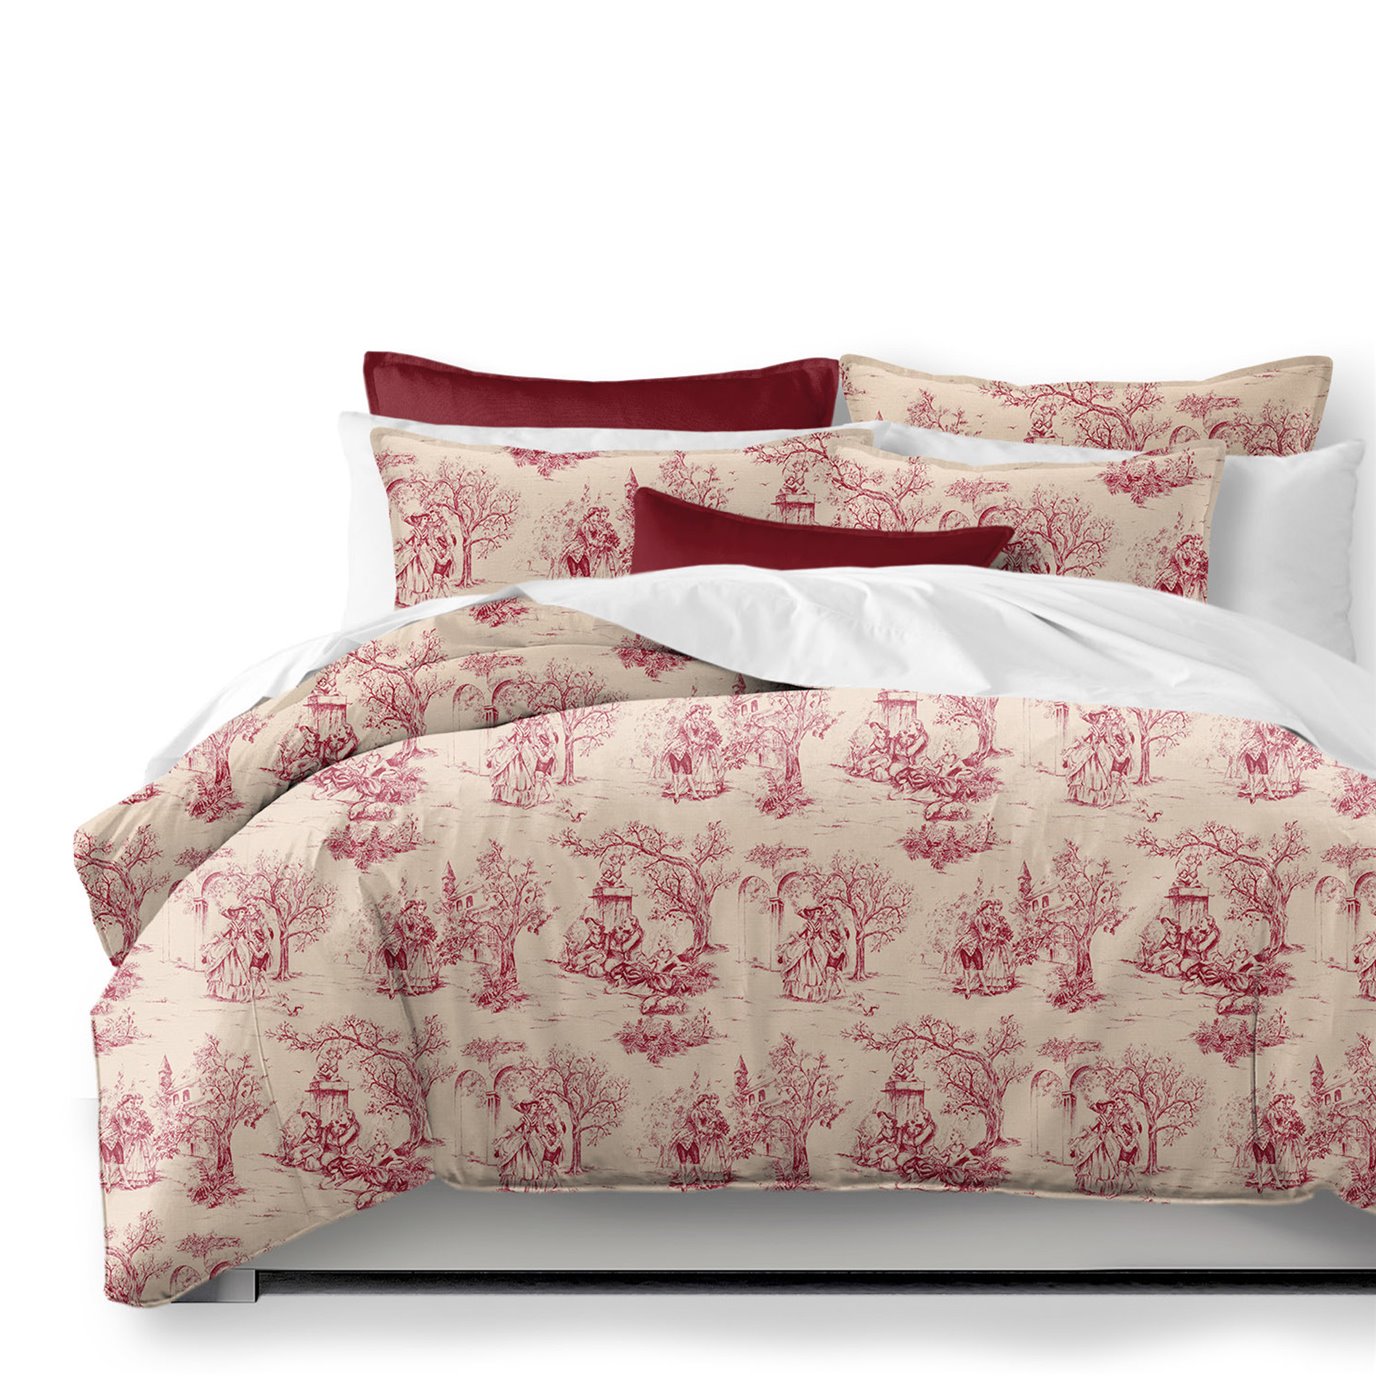 Archamps Toile Red Duvet Cover and Pillow Sham(s) Set - Size Twin